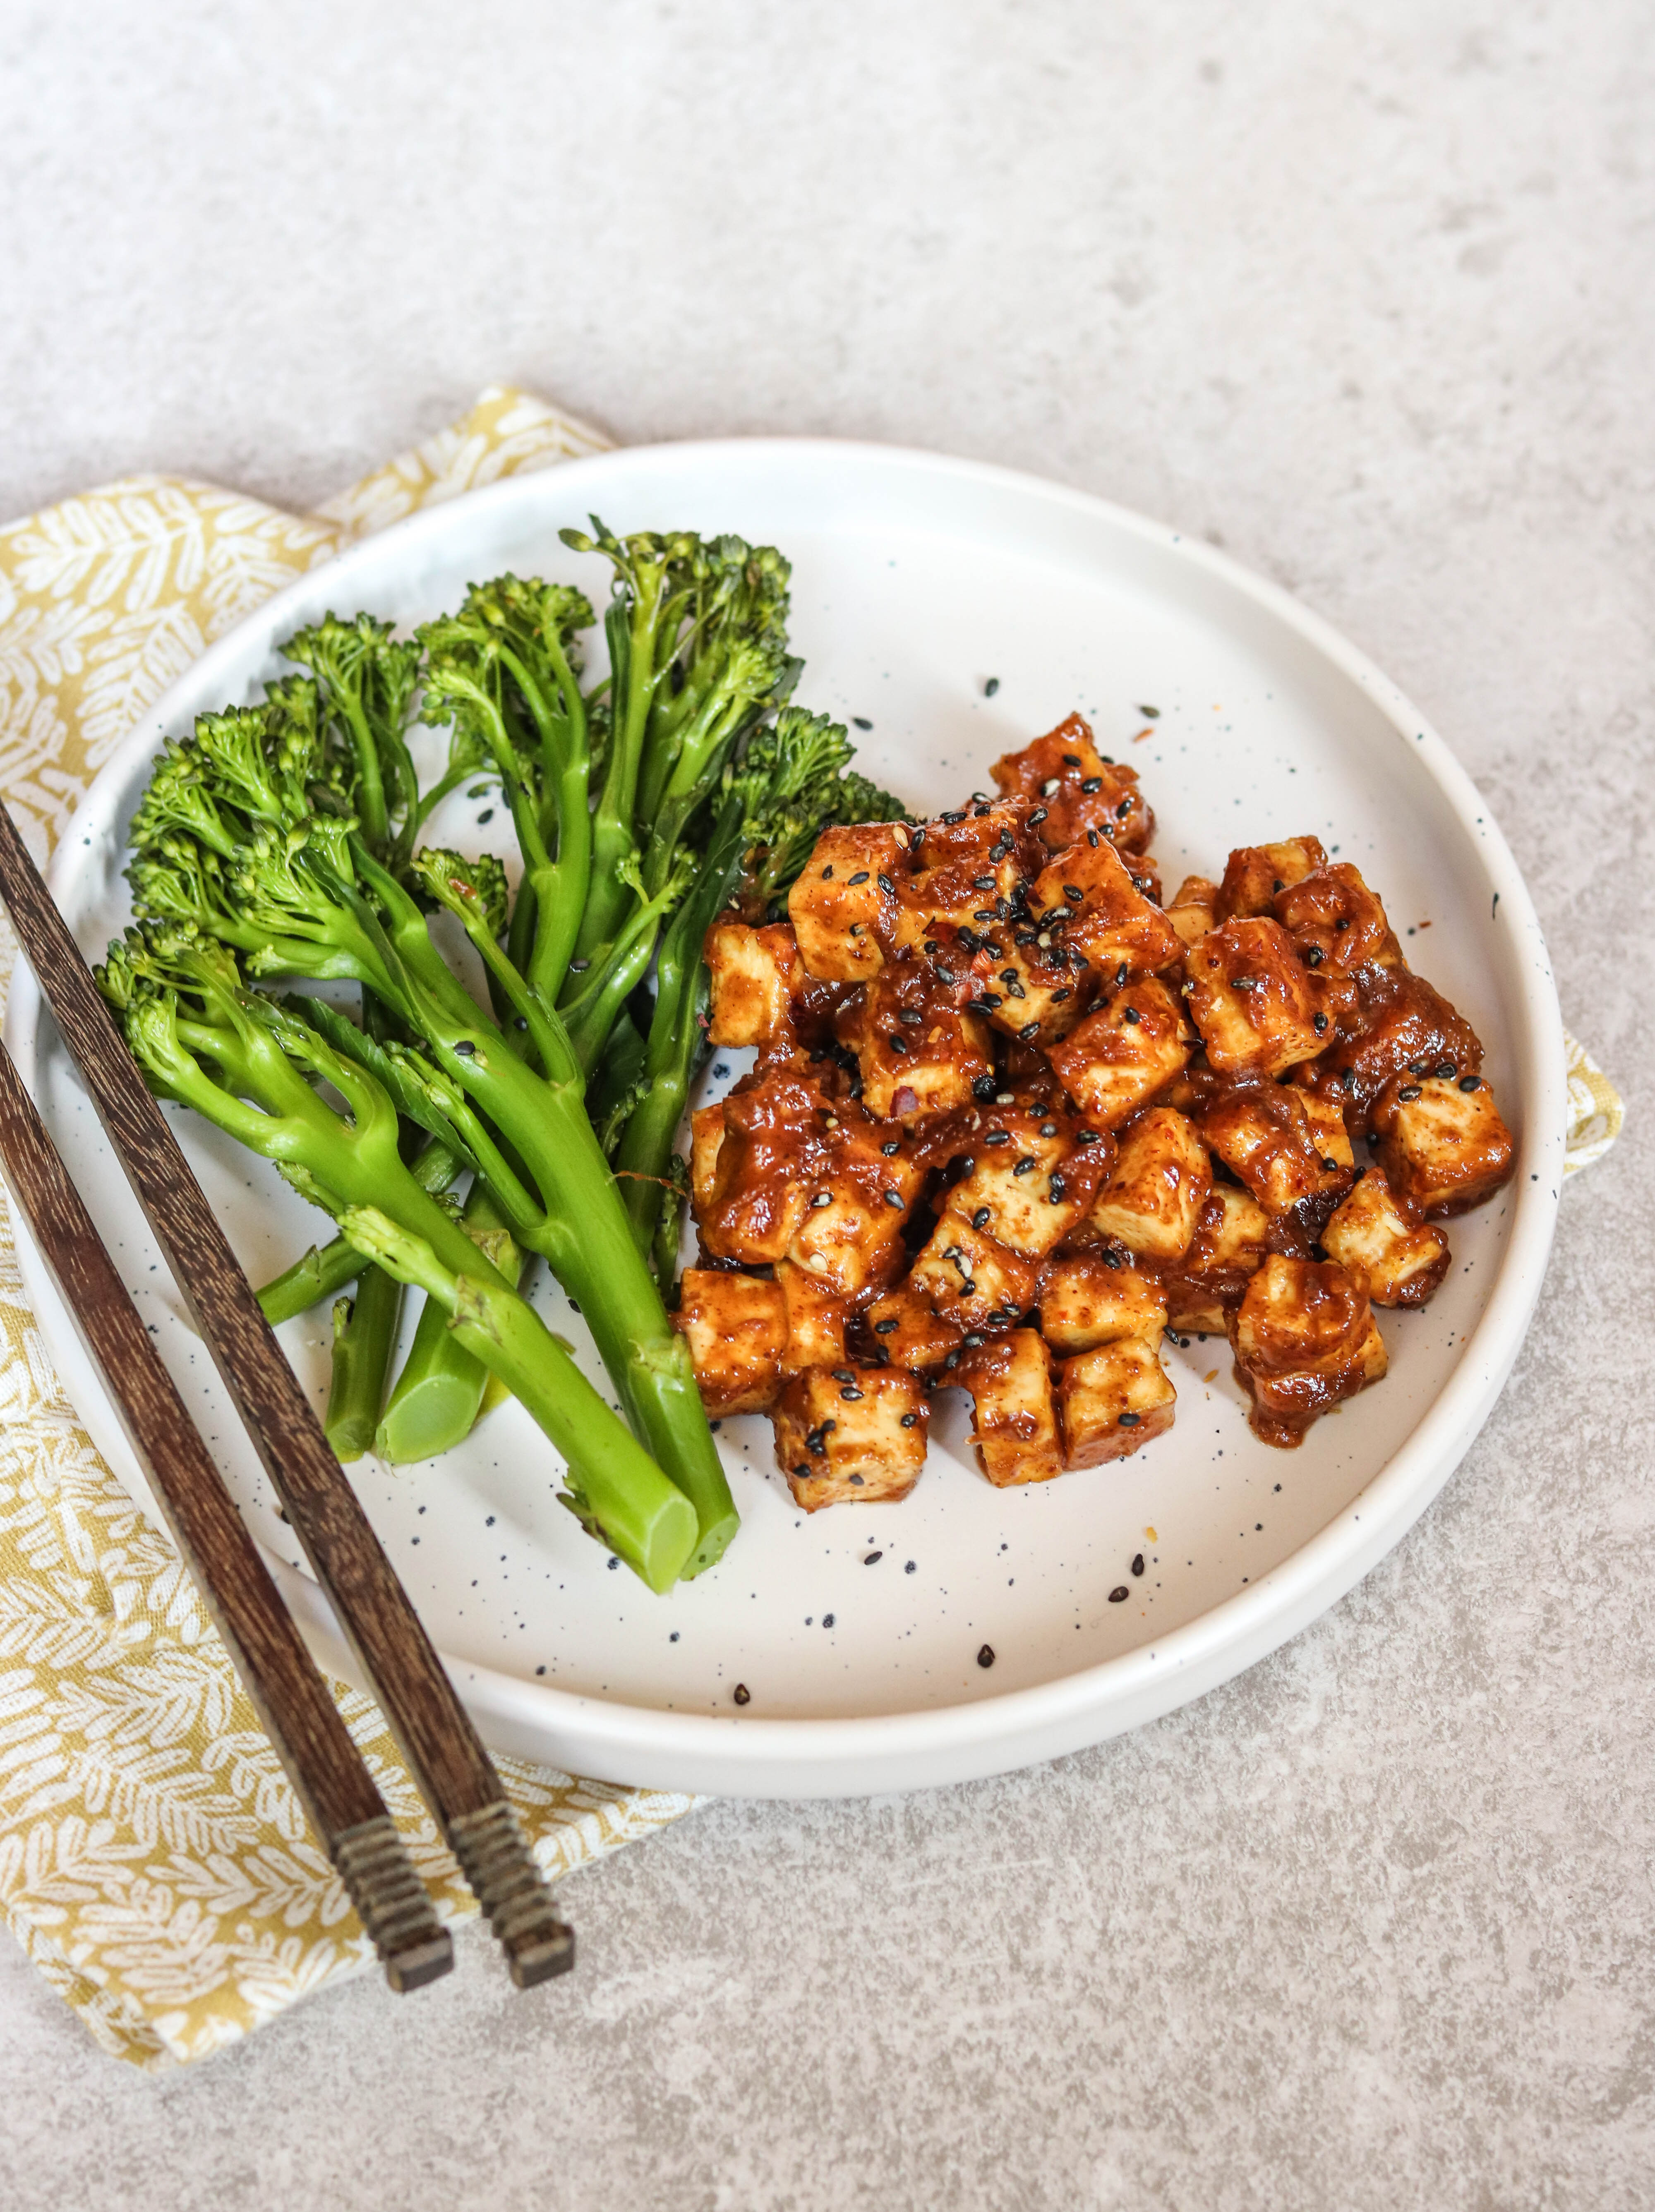 Tofu in a peanut sauce feels as indulgent as a takeaway but with less than half the calories.